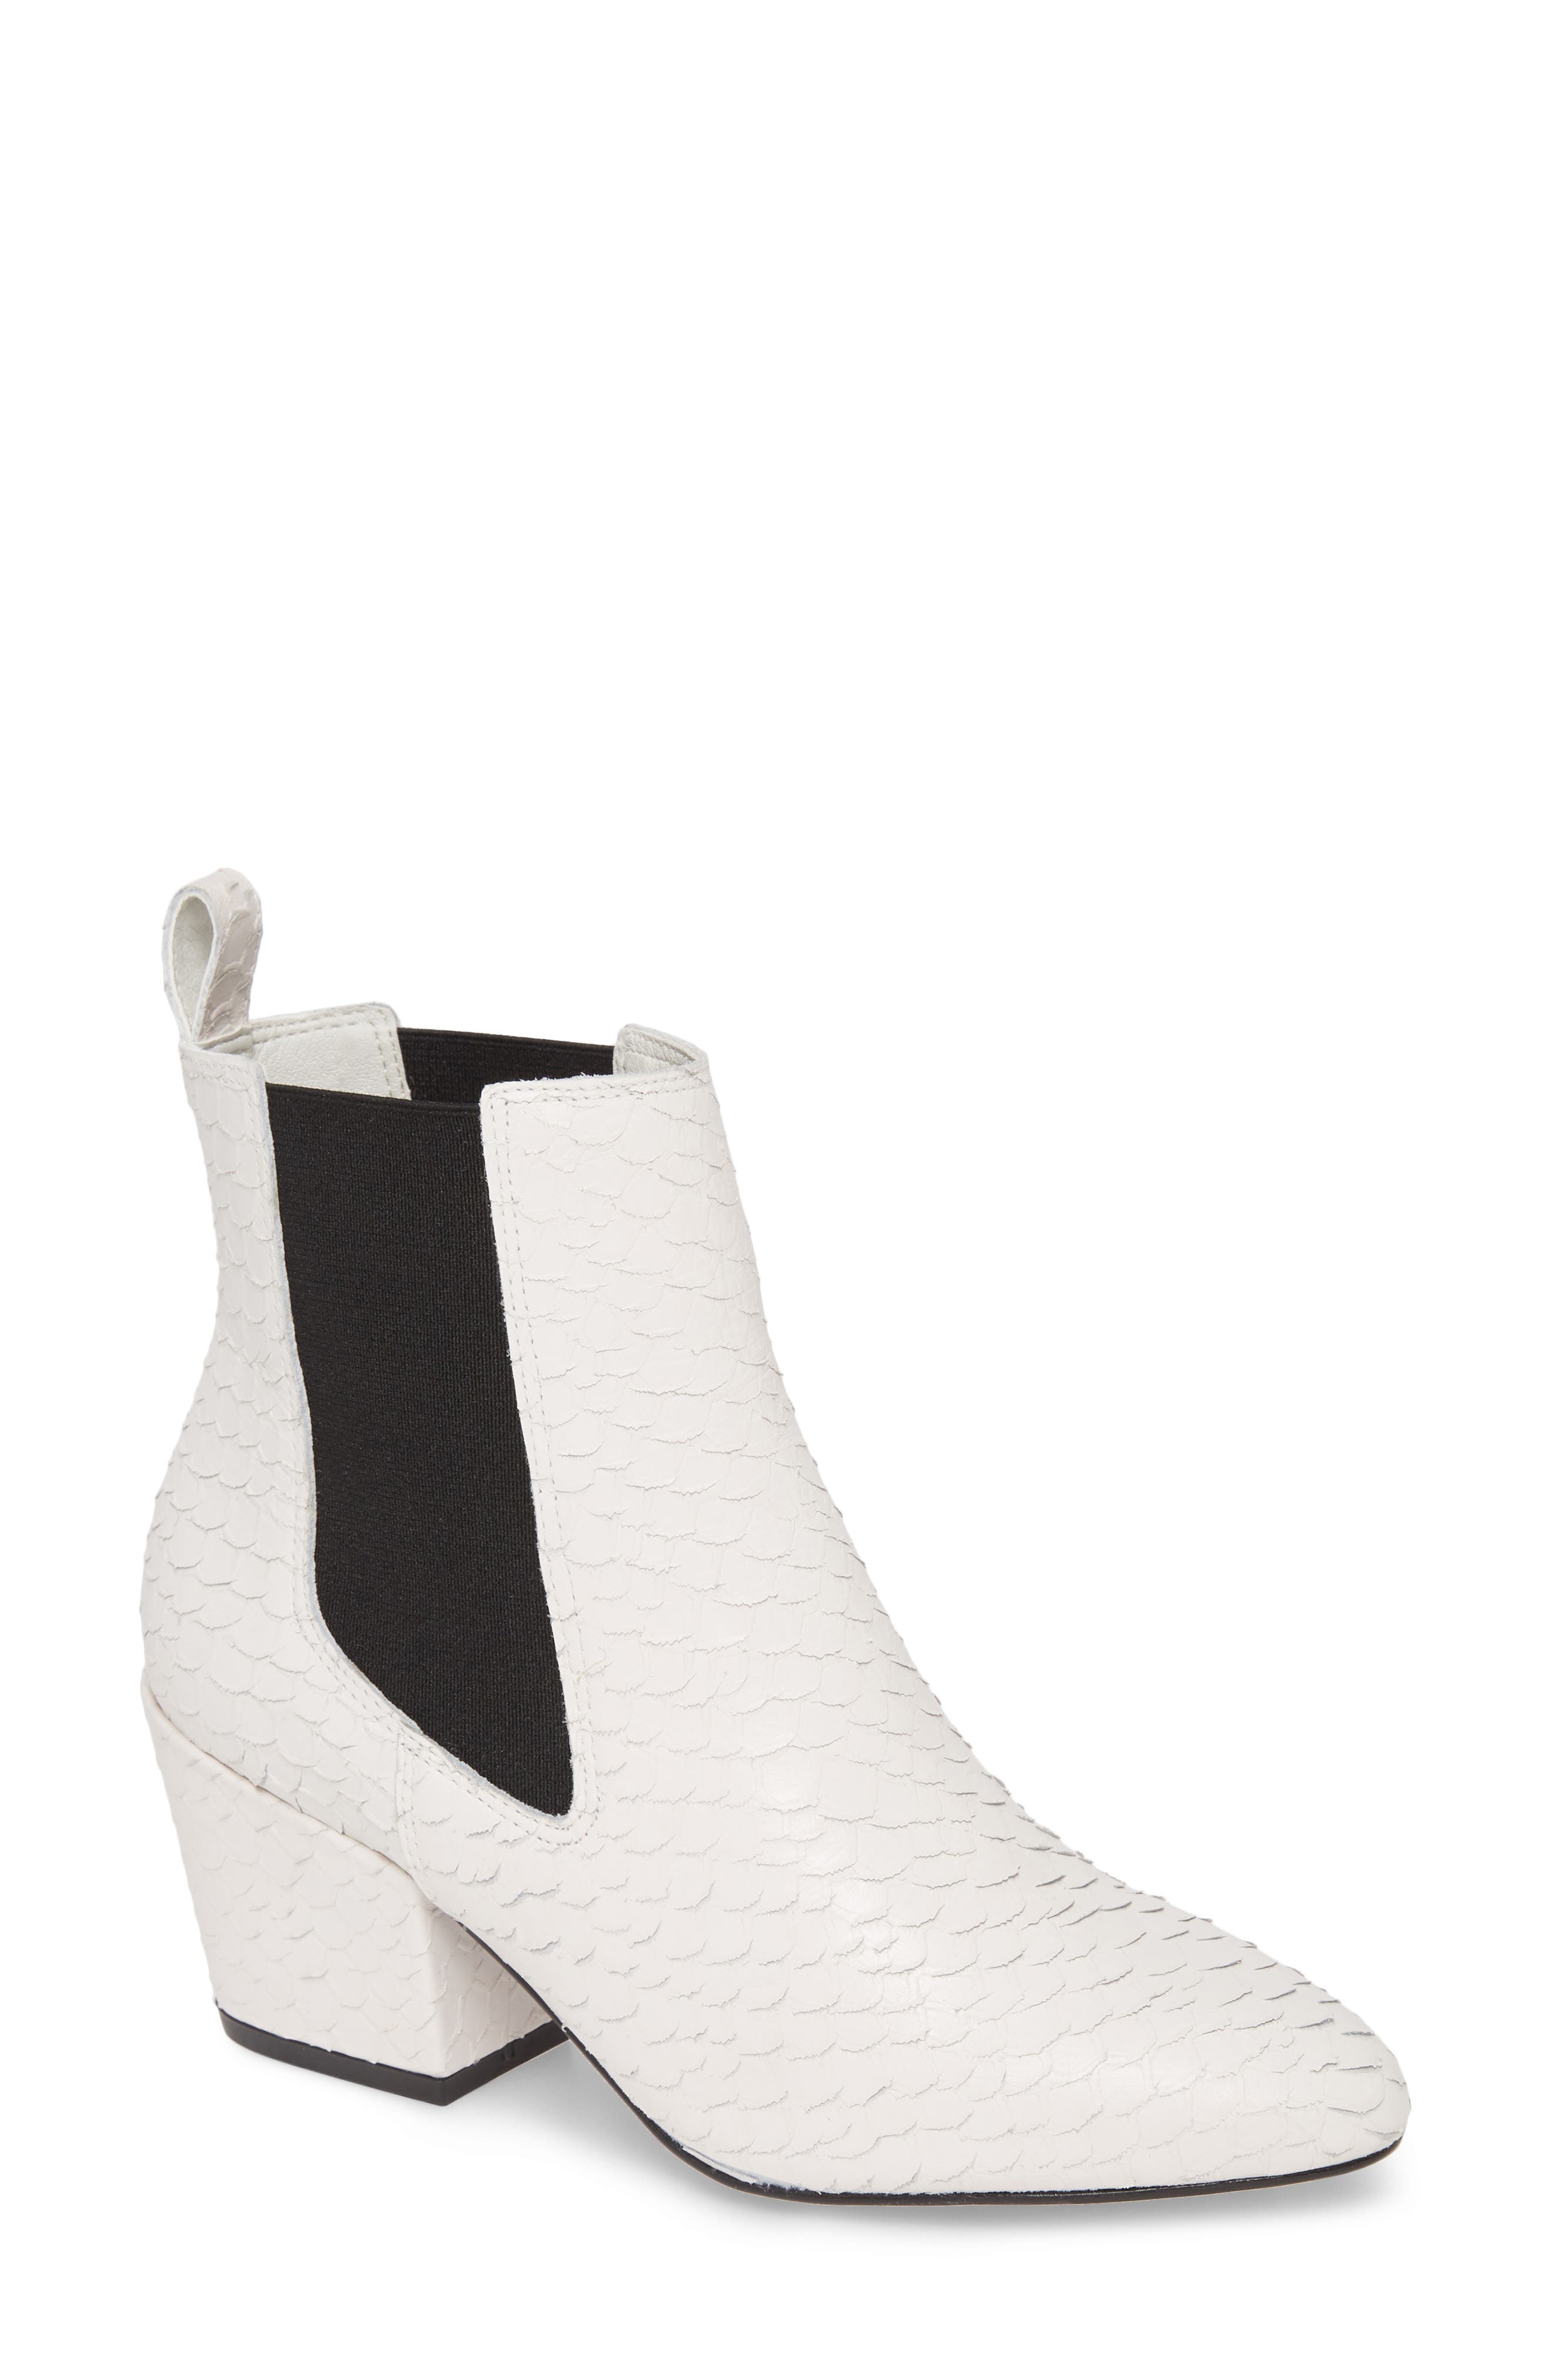 matisse at ease boots